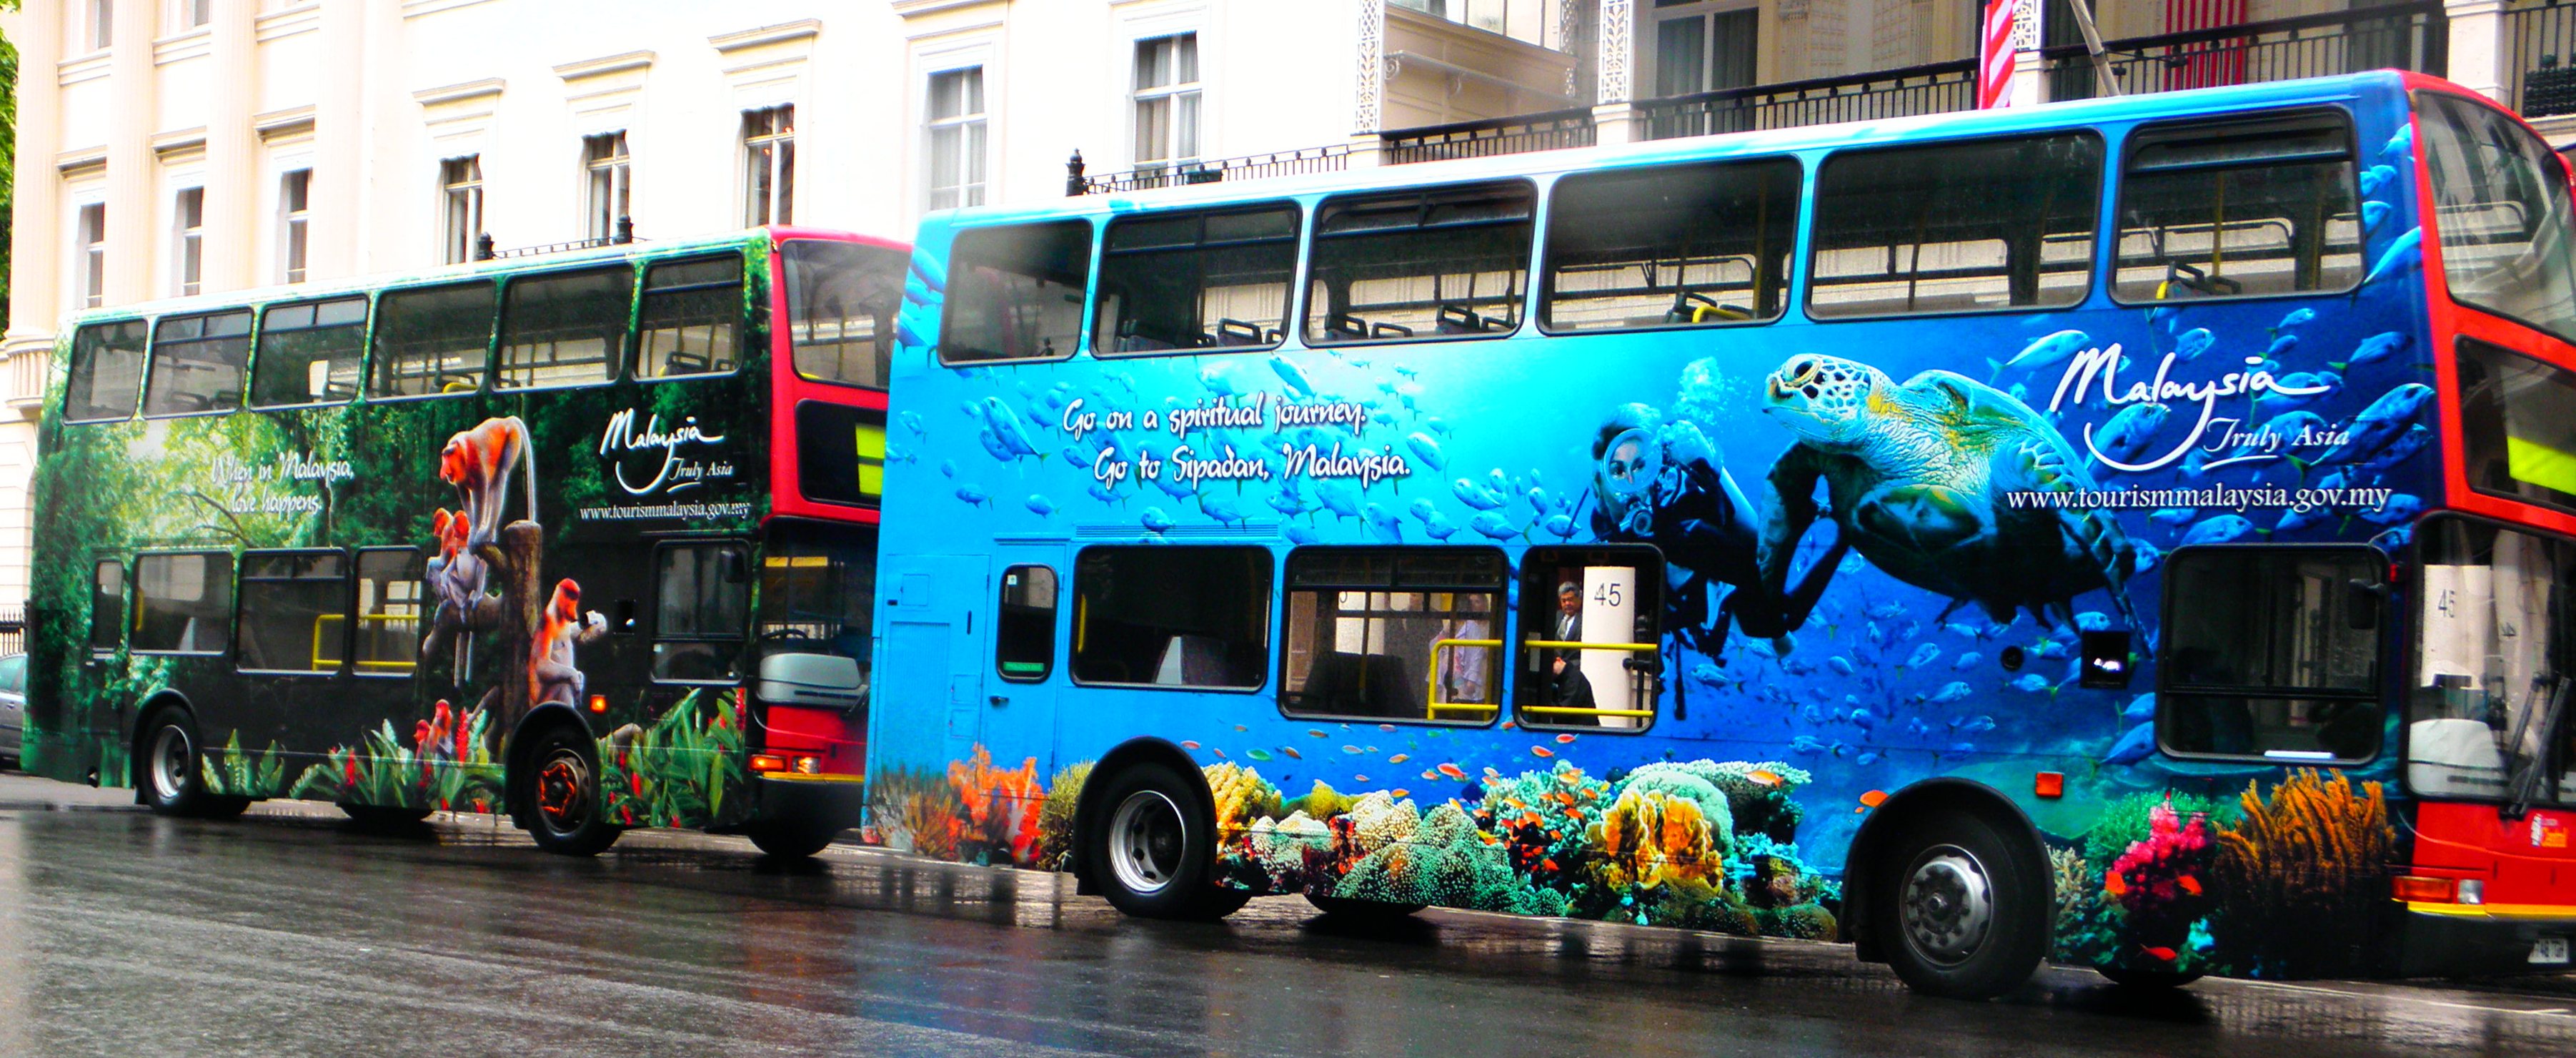 Fully wrapped buses for Tourism Malaysia in London, UK #outdoor ...